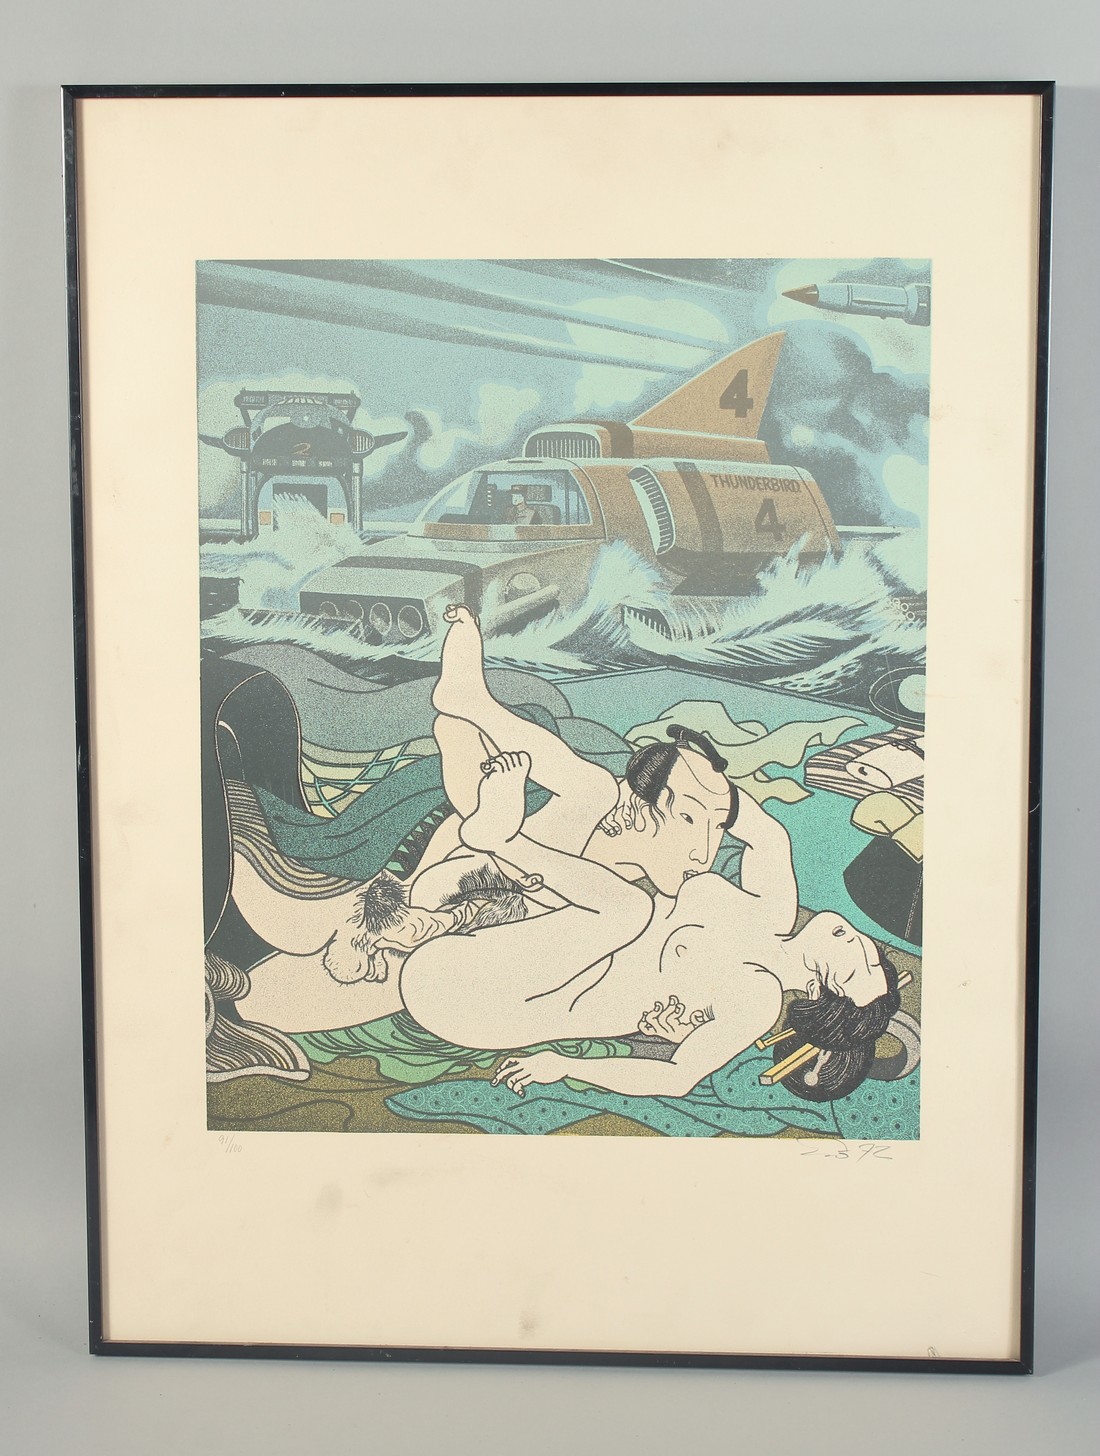 AN UNUSUAL JAPANESE EROTIC LITHOGRAPH PRINT, signed by artist, 91/100, framed - unglazed, 64cm x